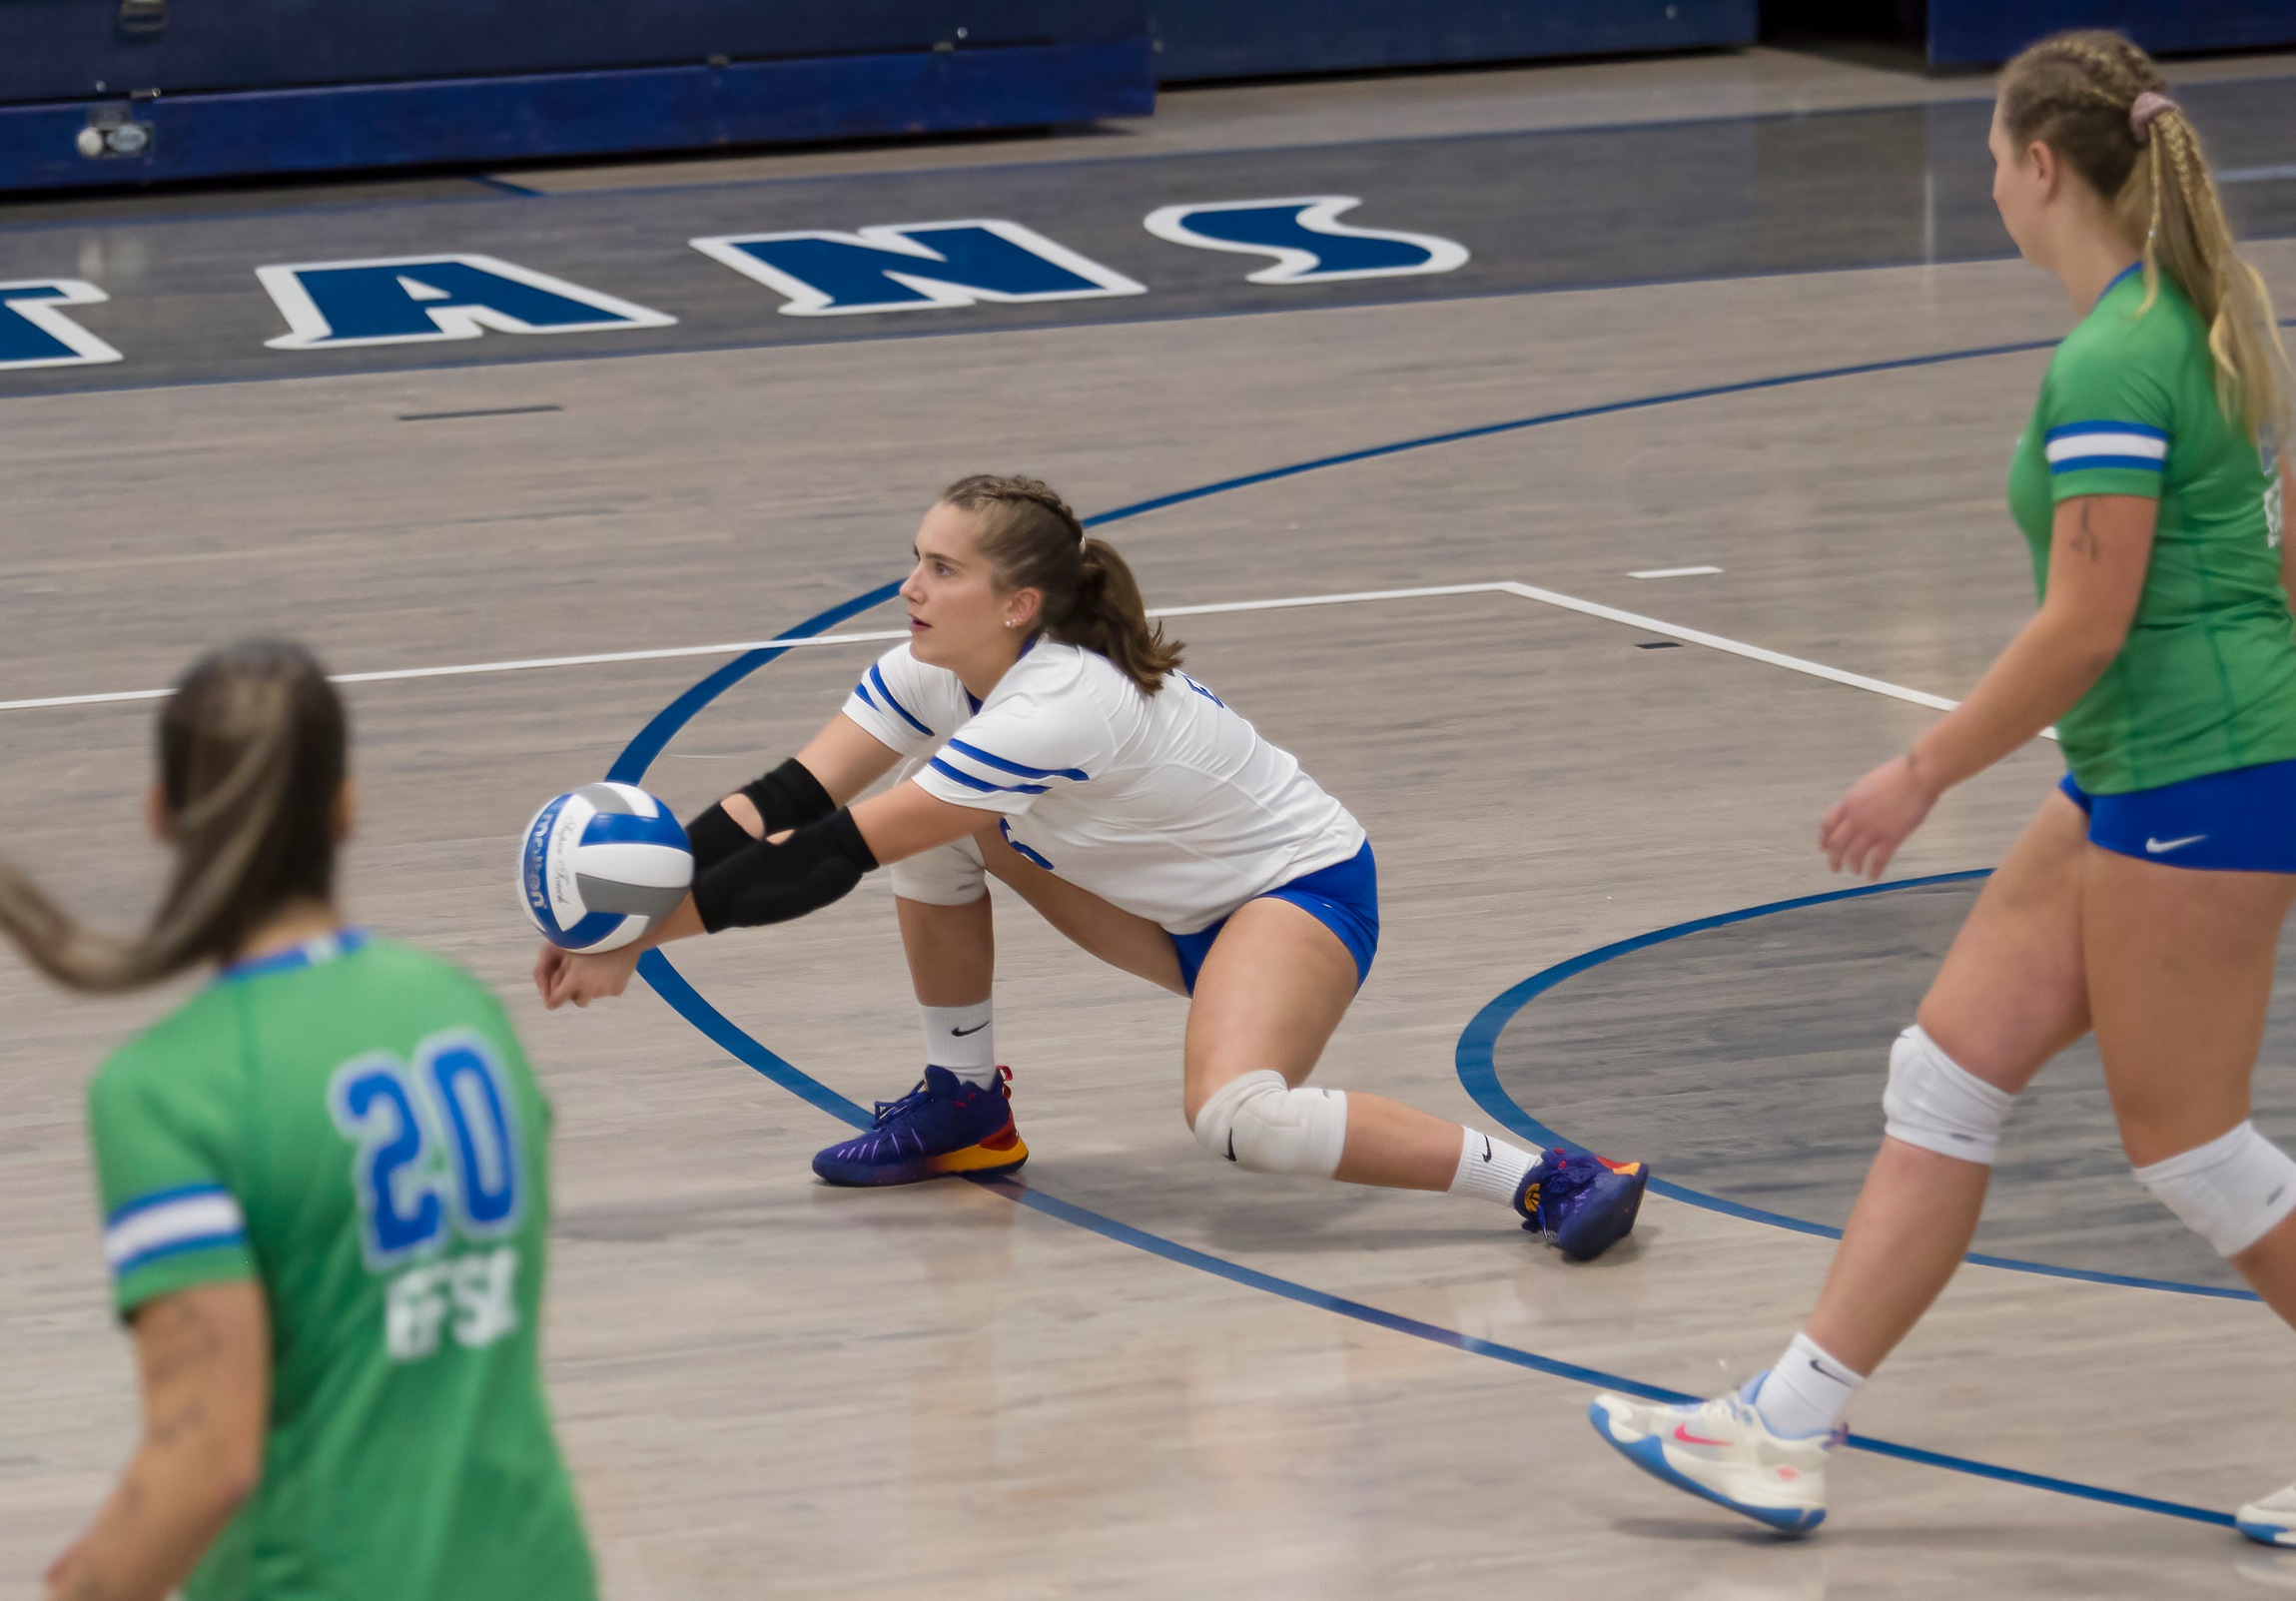 Women's volleyball player Riedmuller named Region 8 Defensive Player of Week